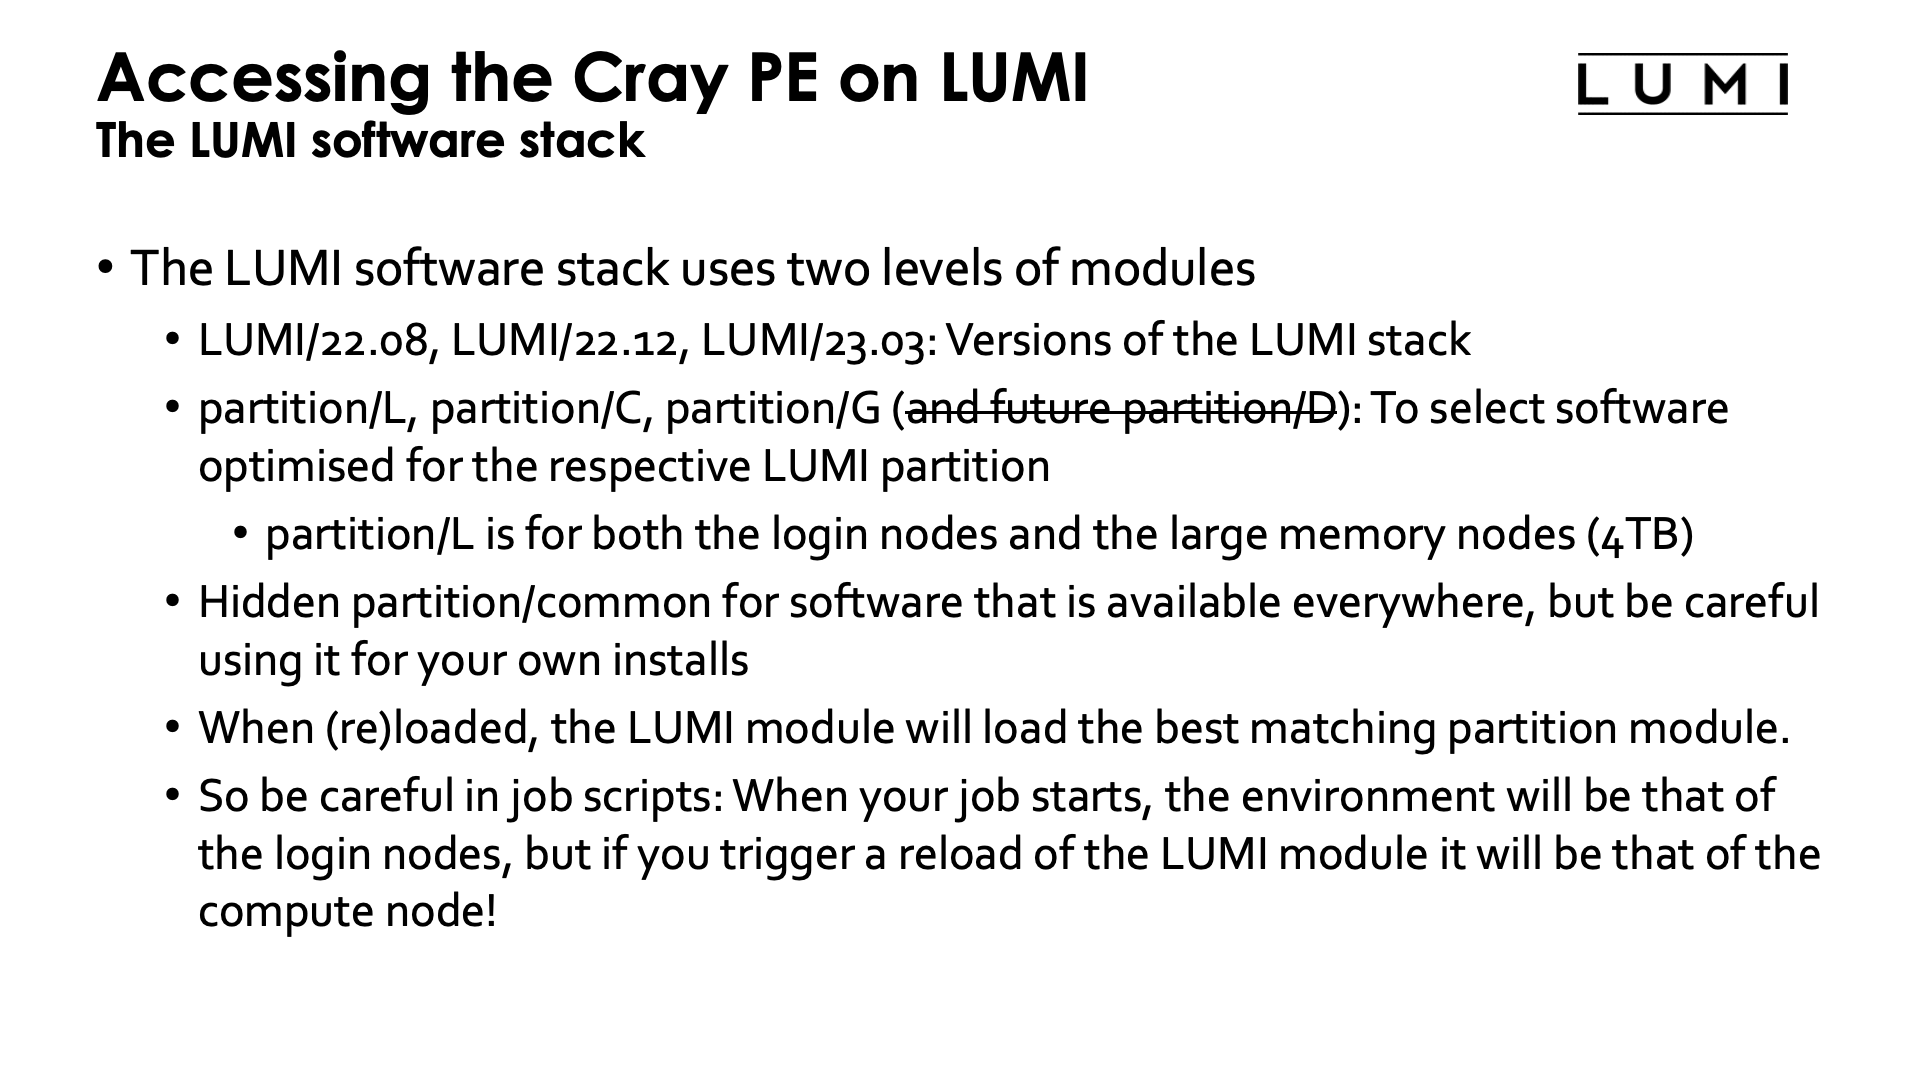 The LUMI software stack